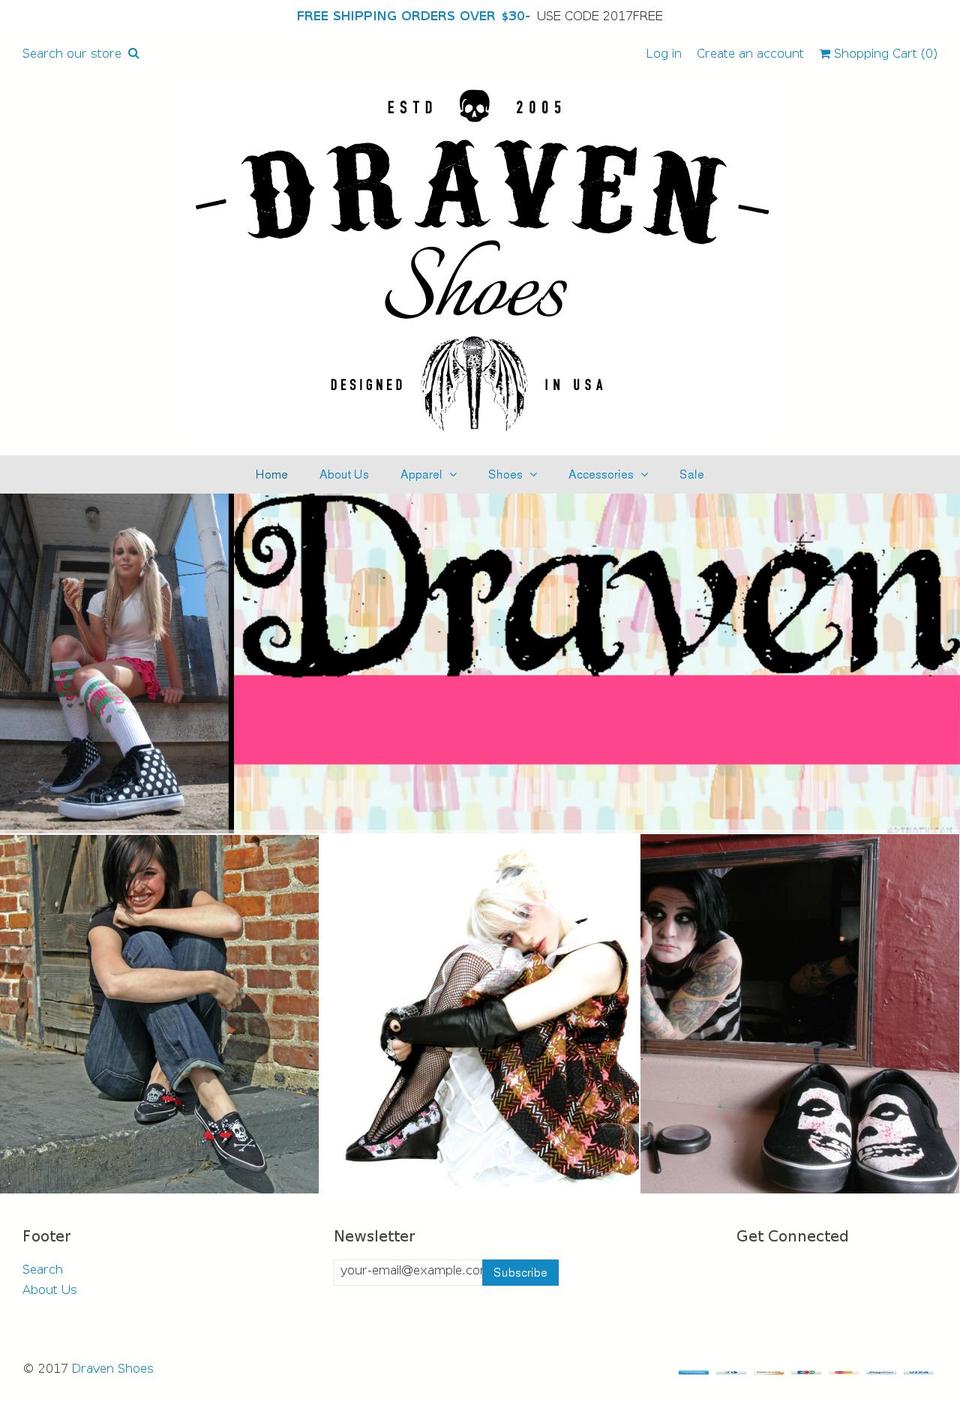 Weekend Shopify theme site example dravenshoes.com